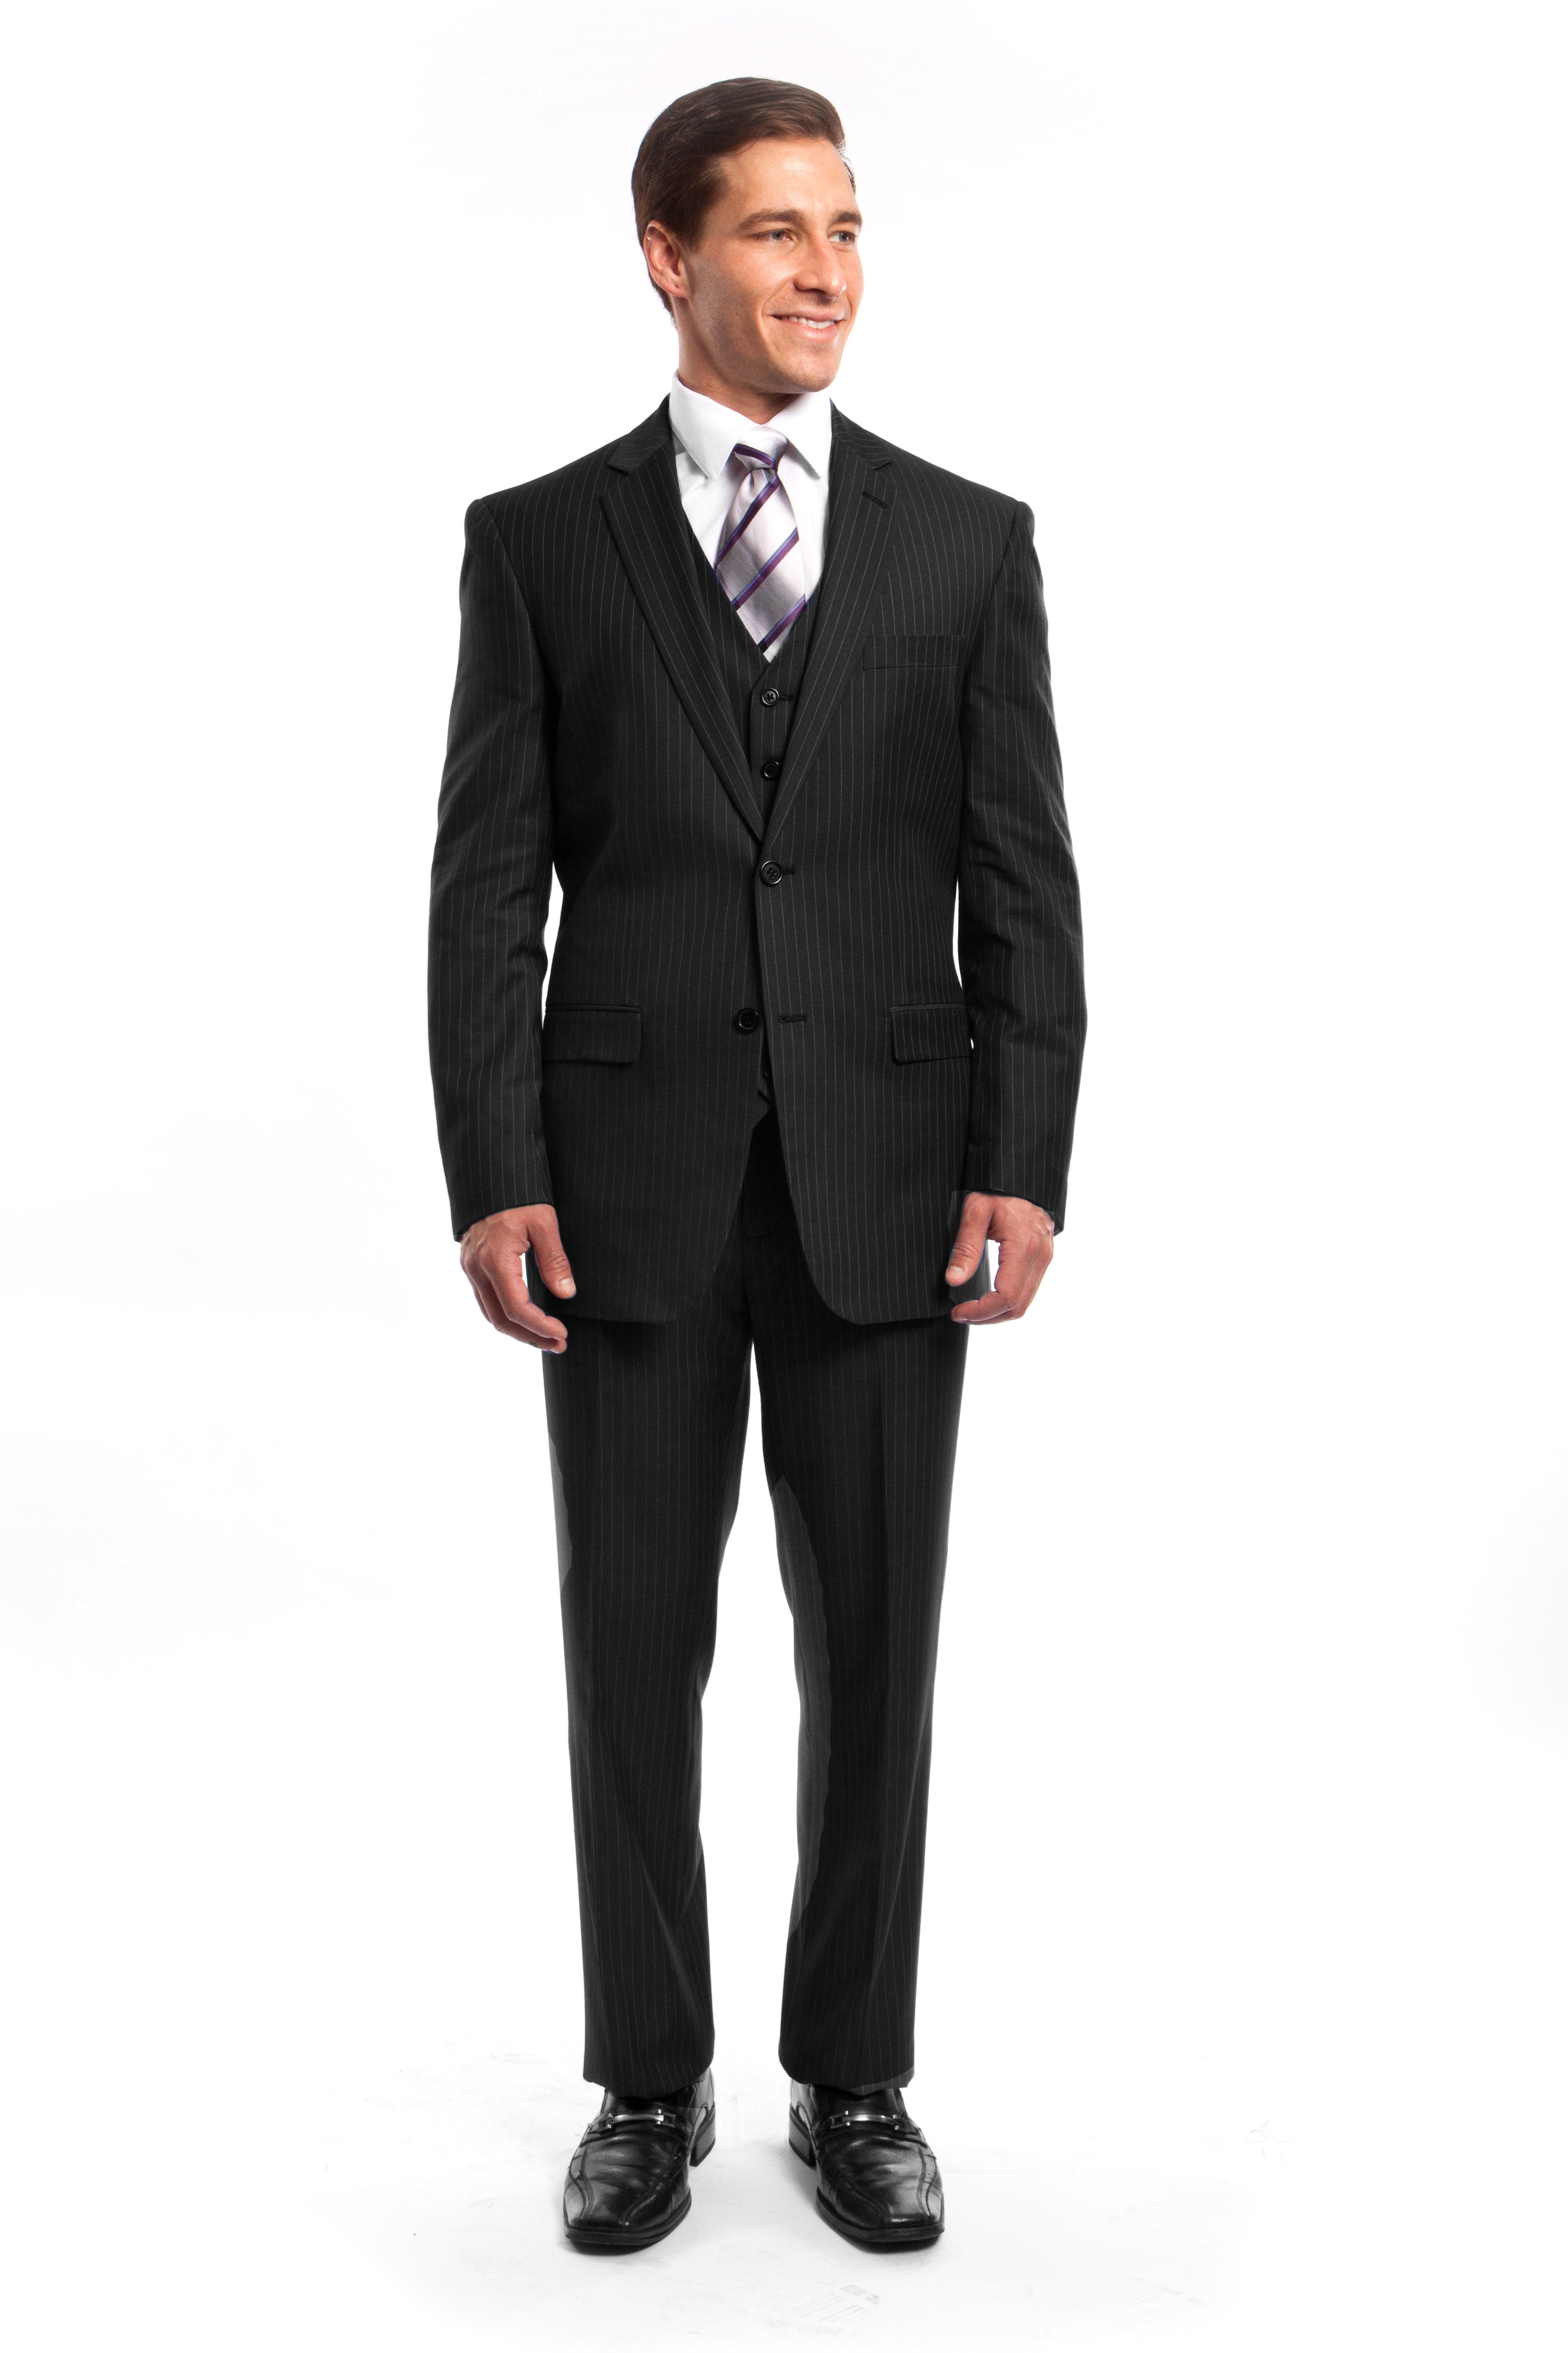 Black Suit For Men Formal Suits For All Ocassions M120-01